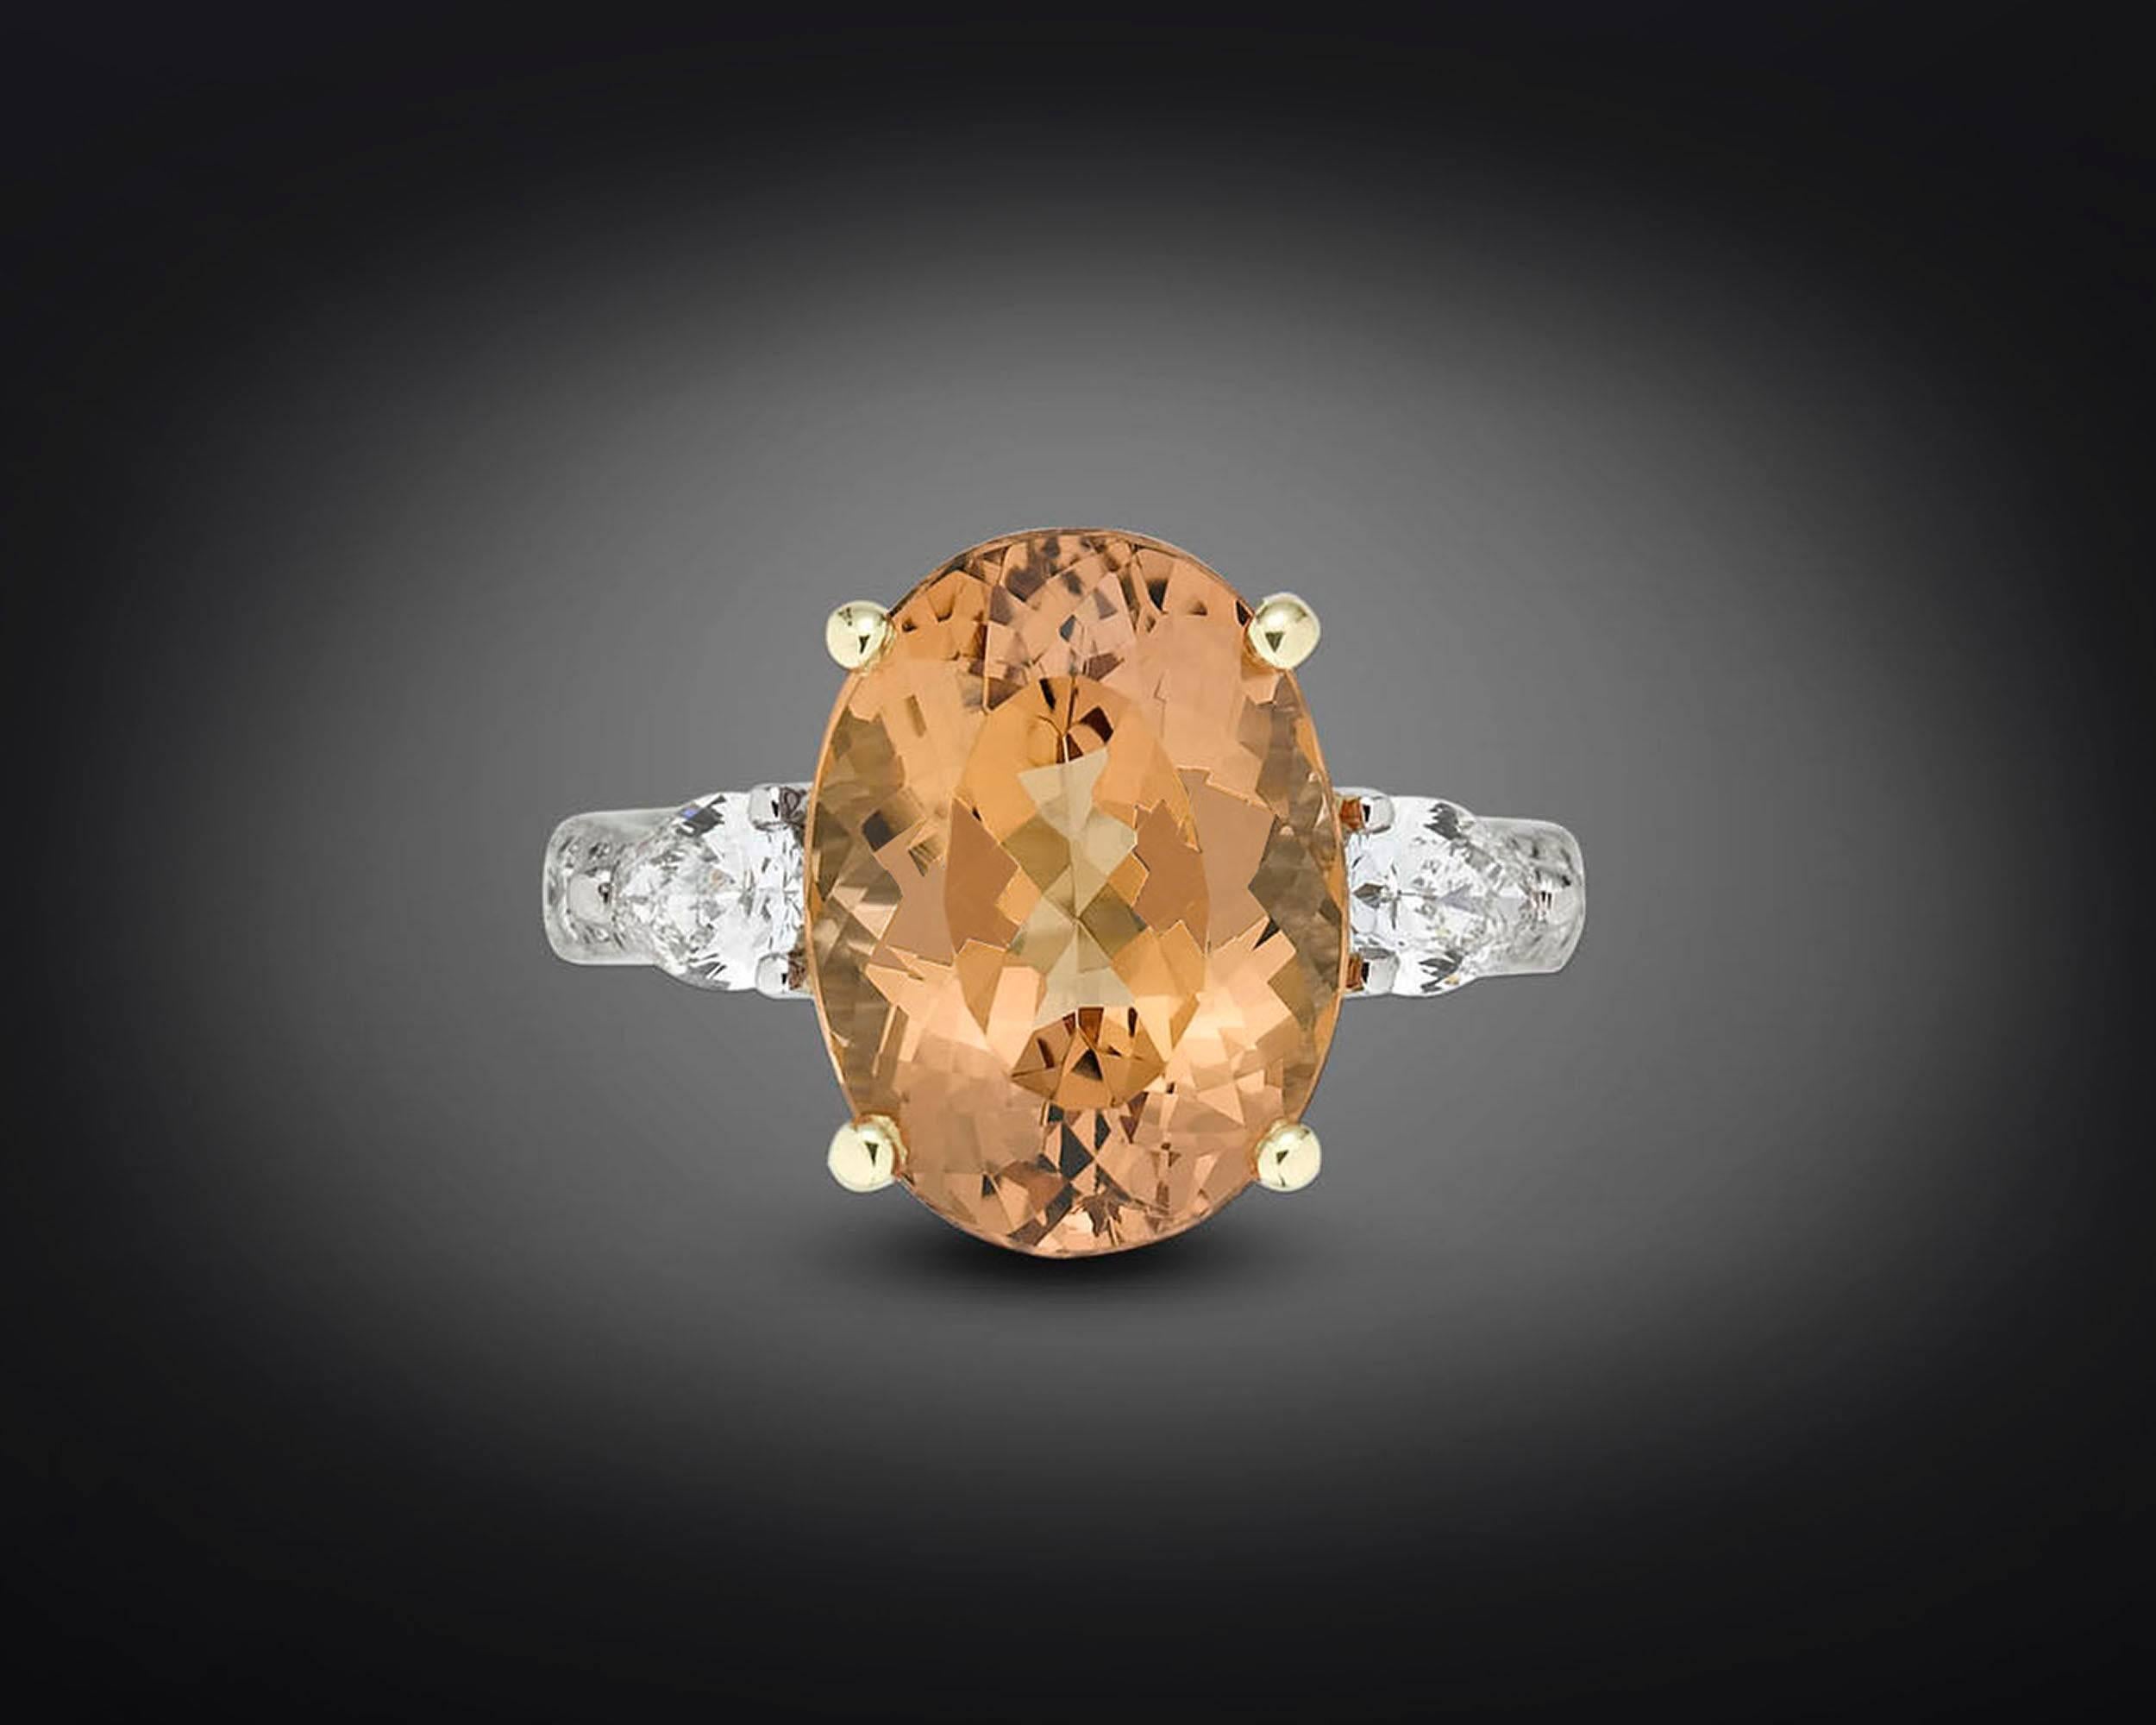 With an exceptional peachy hue reminiscent of a tropical sunset, this 6.63 carat Imperial topaz is one of the most sought-after colored gemstones. This elegant oval specimen is flanked by a pair of pear-shaped diamonds totaling .49 carats, with